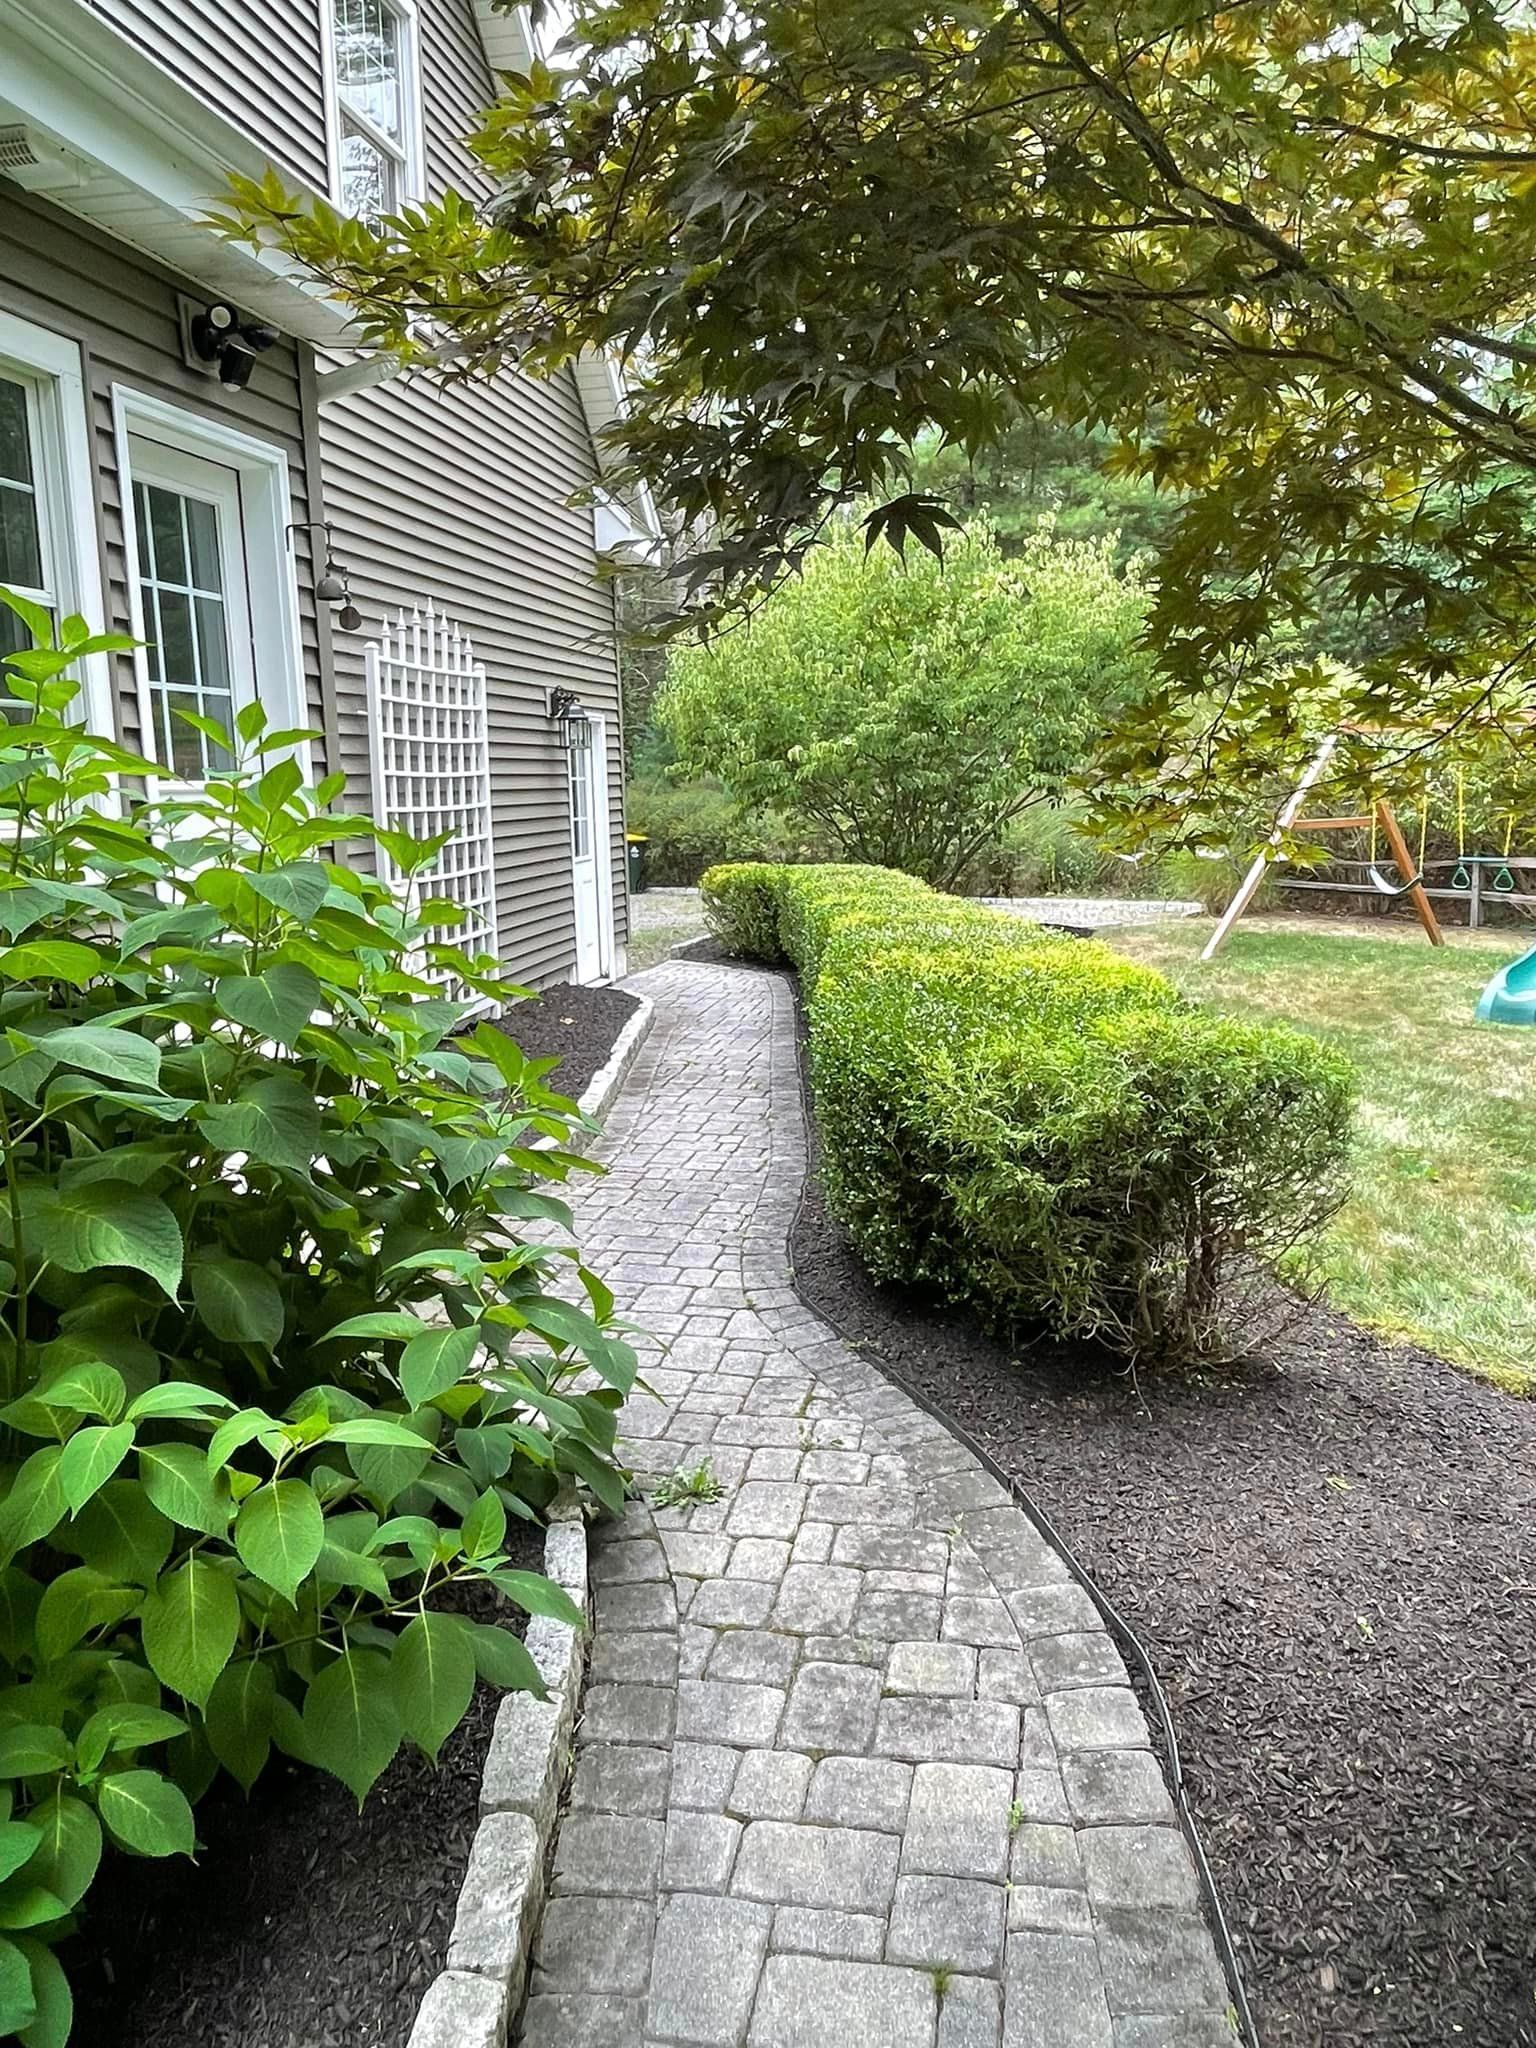 Landscape Design and Installation for Chris Stupak Property Maintenance and Excavation in Middlebury, CT